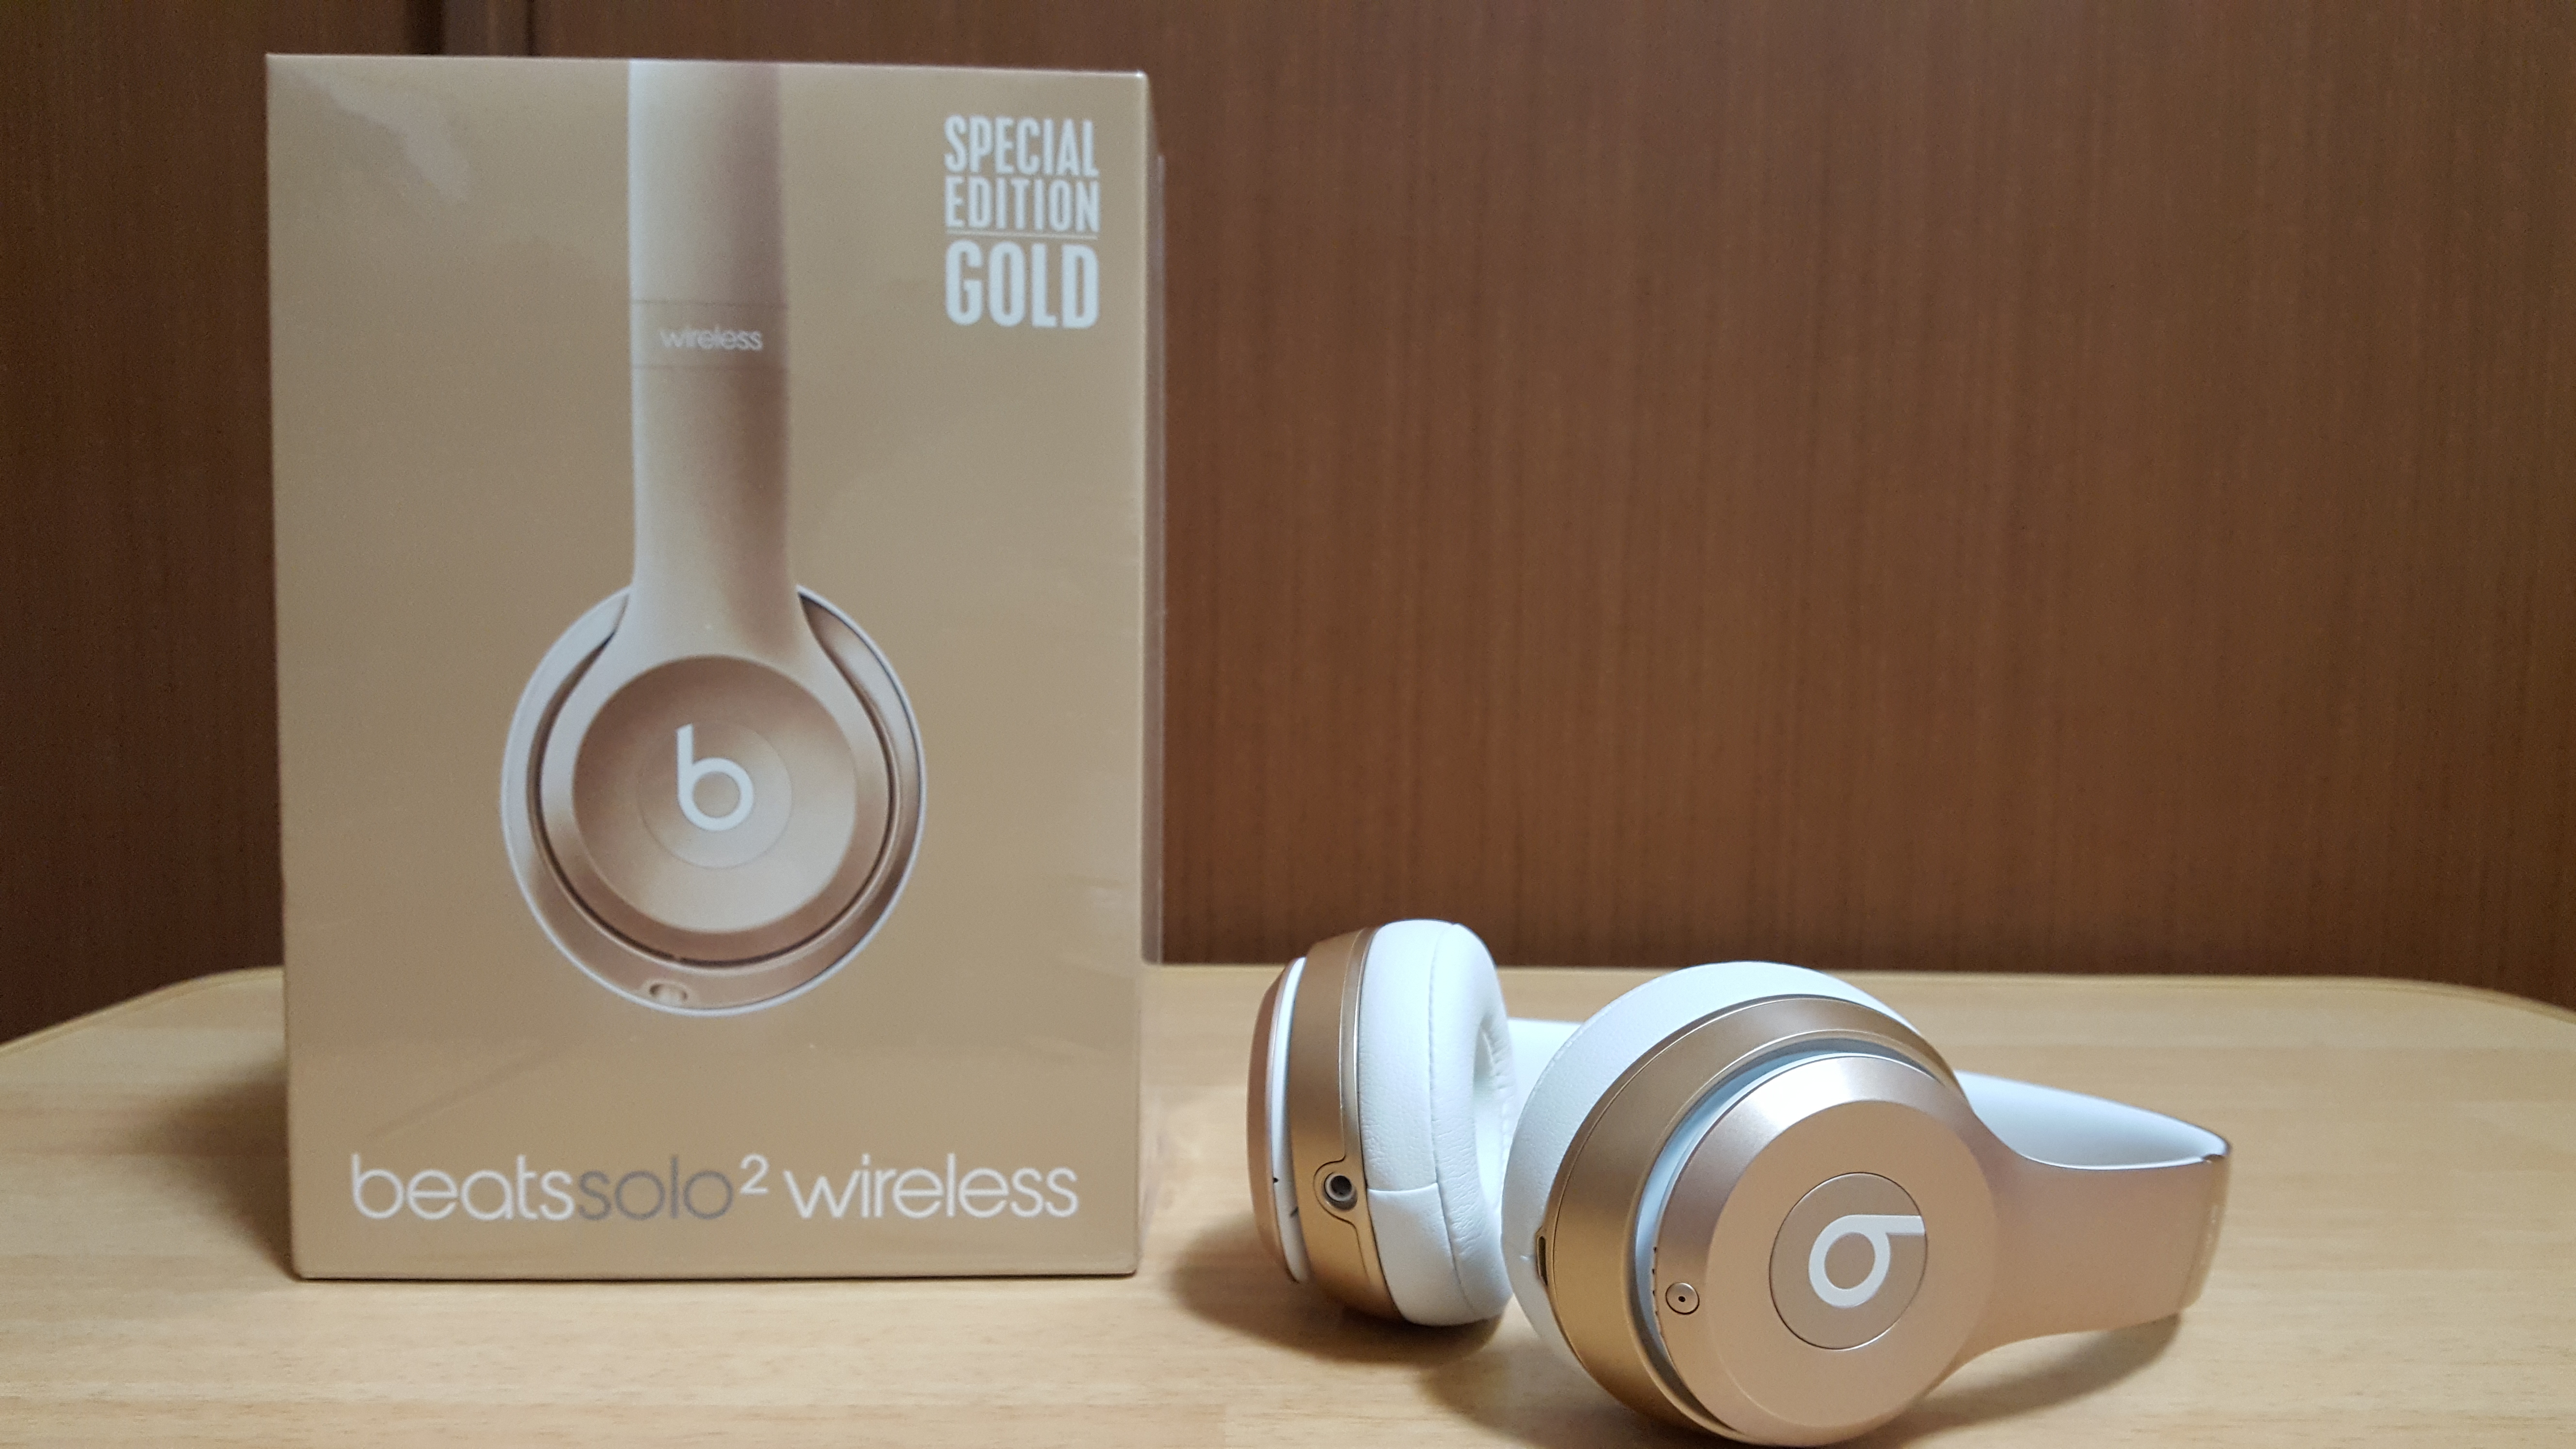 beats by dr.dre「Beats Solo2 ワイヤレス」レビュー。コンパクト ...